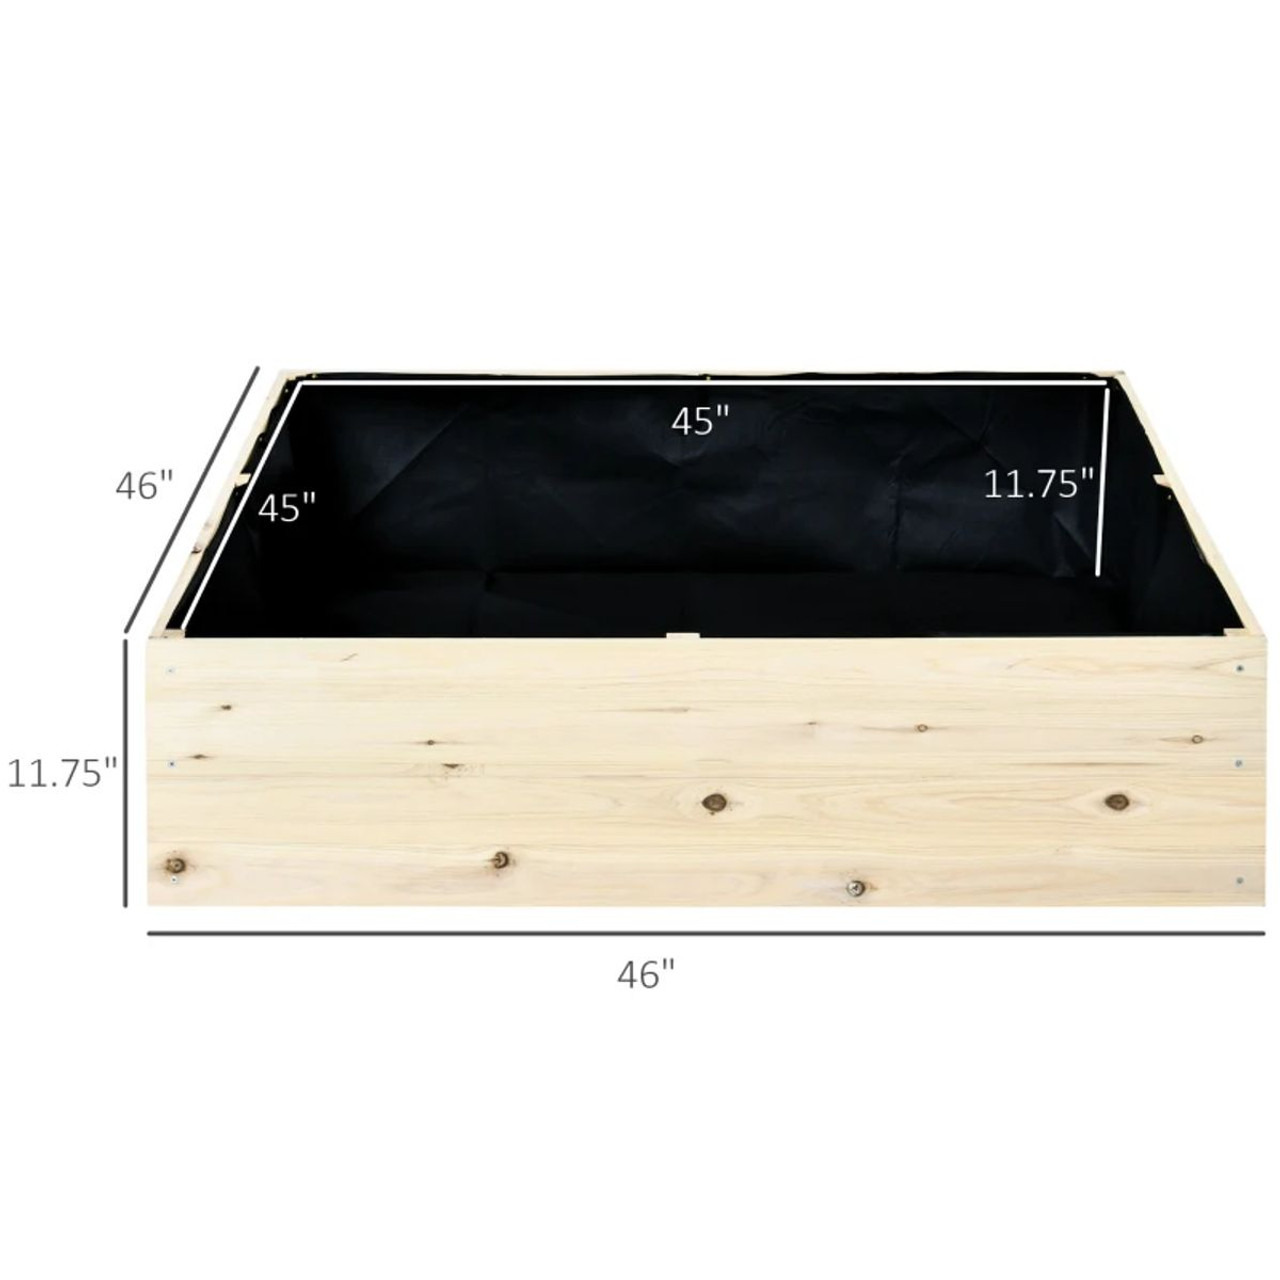 Outsunny® Wooden Raised Garden Bed Kit, 4' x 4' x 1' product image